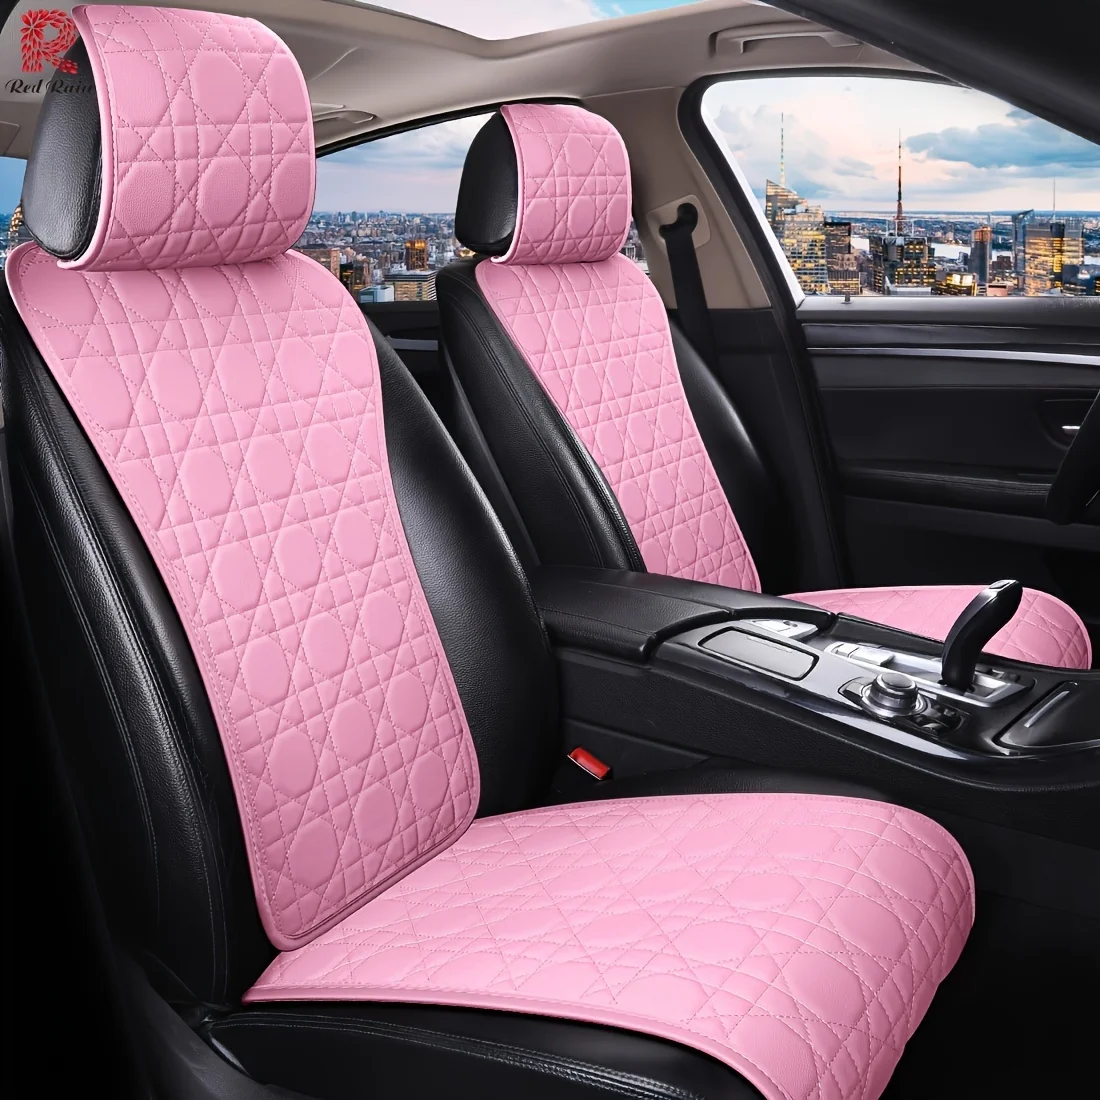 

Fashion Universal Faux Leather Car Seat Covers For Five Seats 11pcs Waterproof Seat Covers Auto Seat Covers For Suv Auto Truck 2